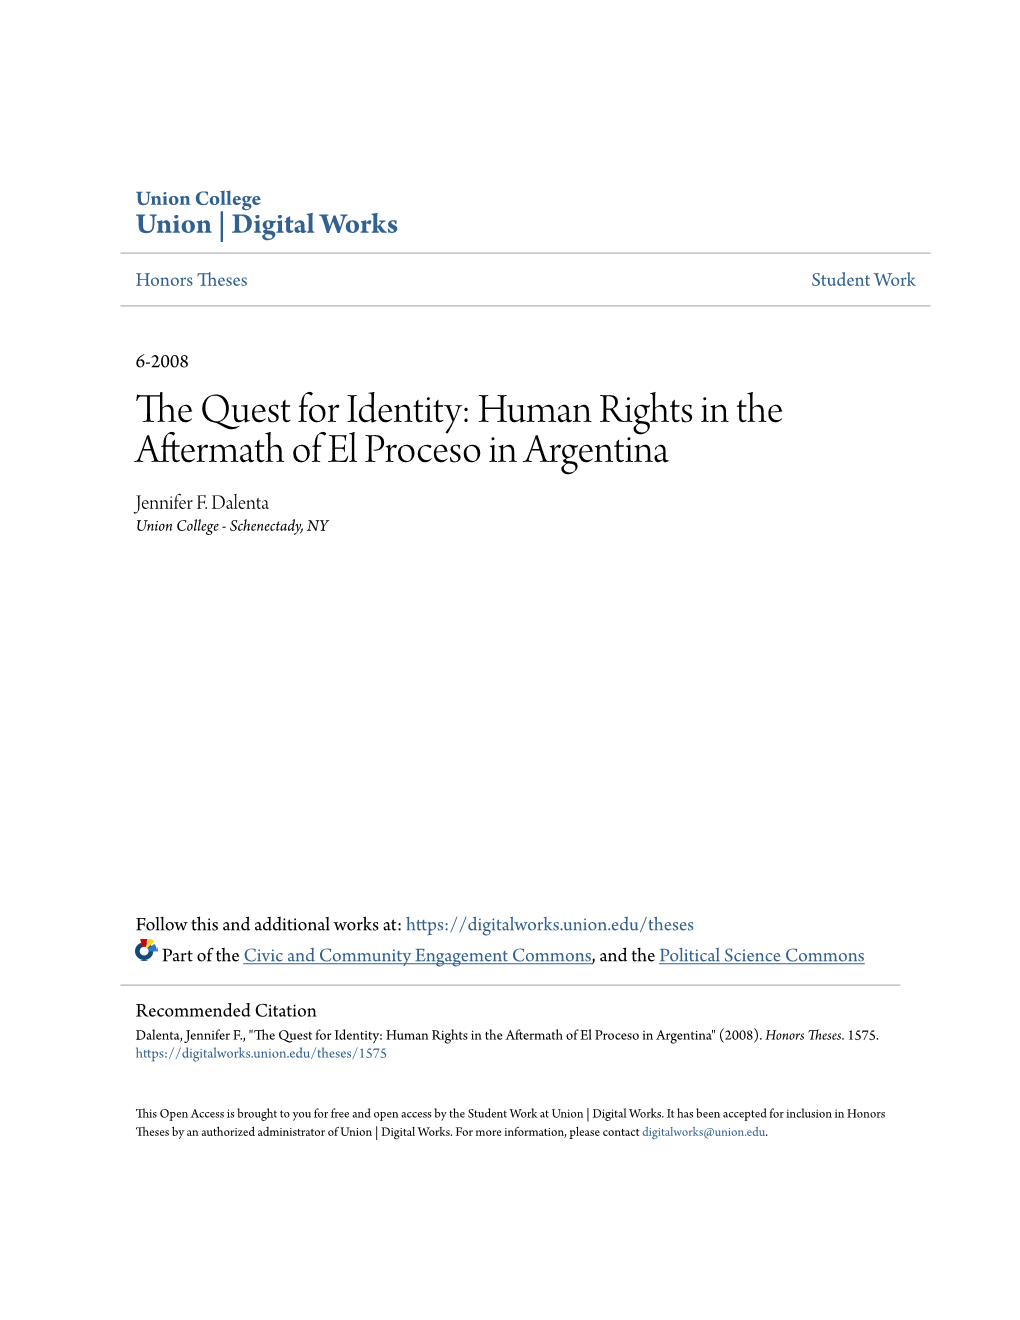 Human Rights in the Aftermath of El Proceso in Argentina Jennifer F